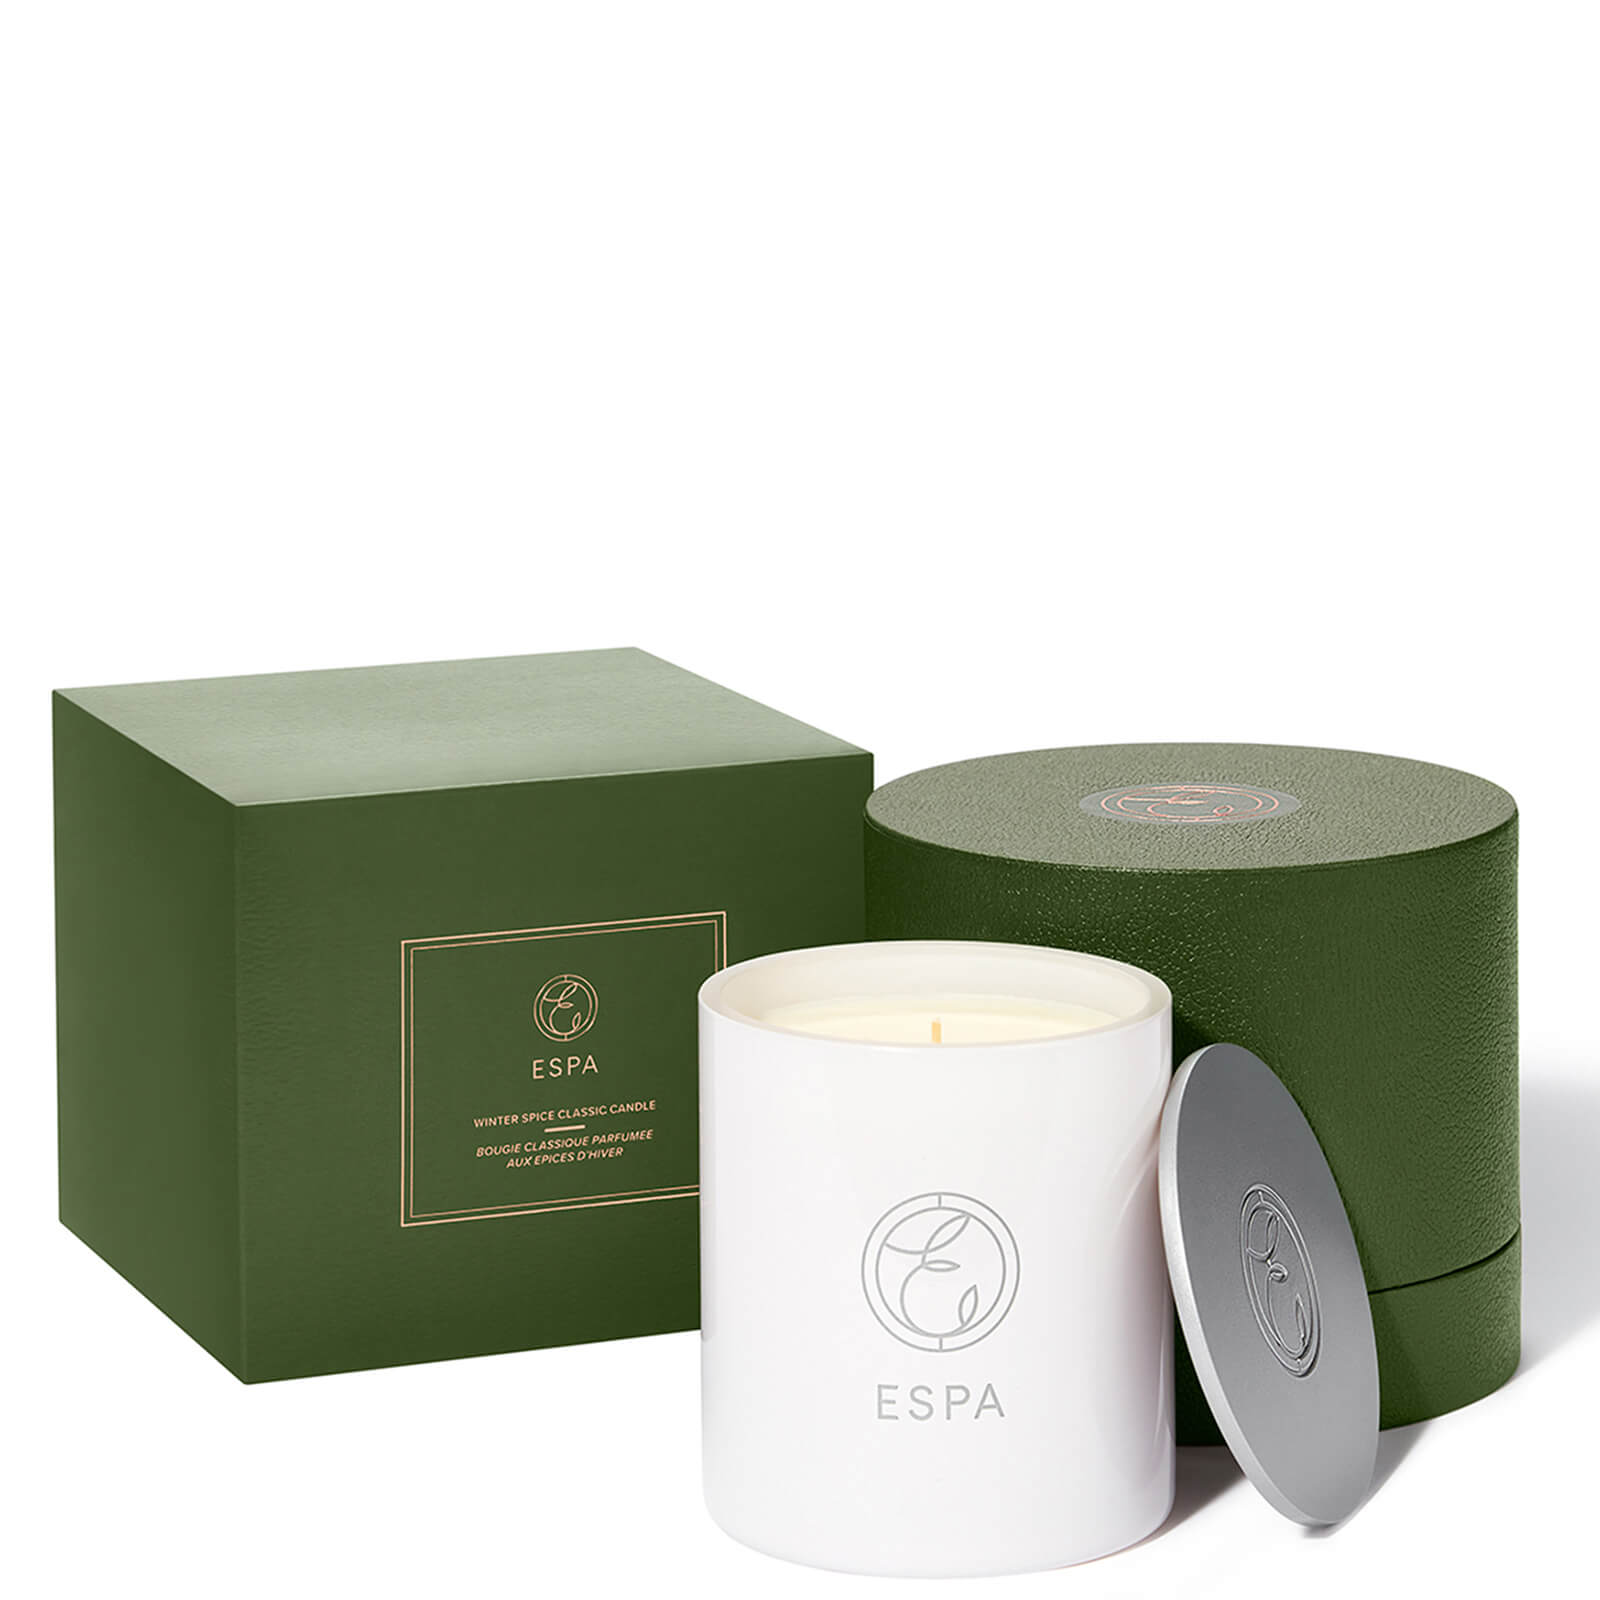 Image of ESPA Winter Spice 200g Candle